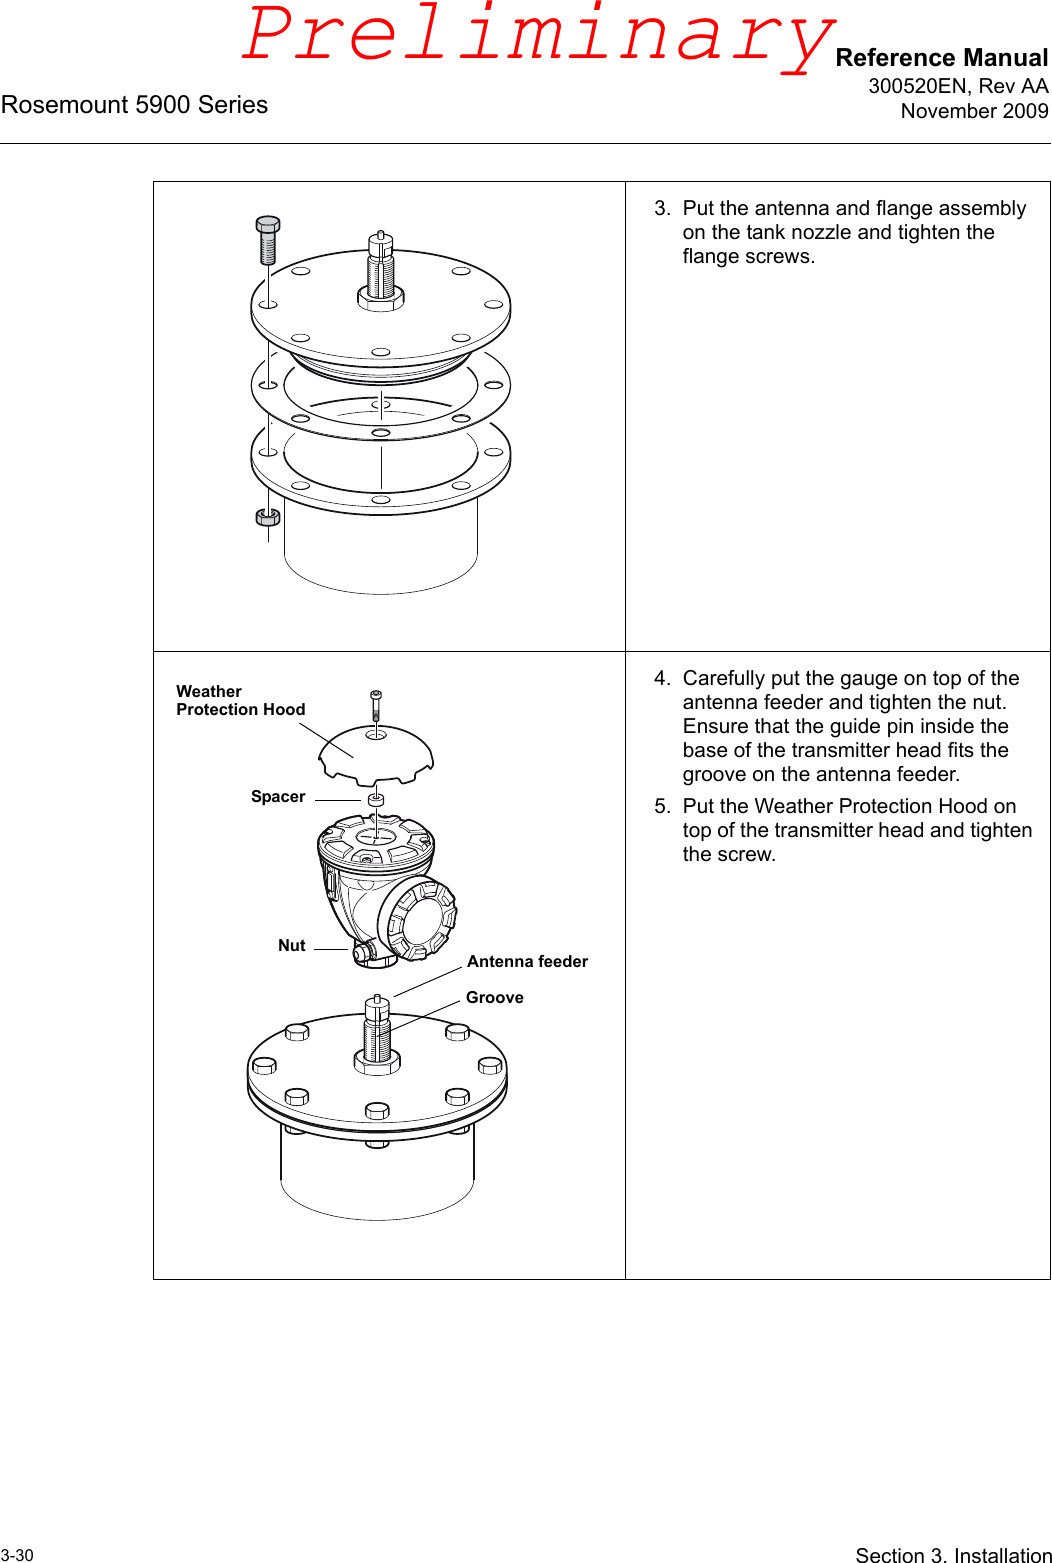 Reference Manual300520EN, Rev AANovember 2009Rosemount 5900 Series3-30 Section 3. Installation3. Put the antenna and flange assembly on the tank nozzle and tighten the flange screws.4. Carefully put the gauge on top of the antenna feeder and tighten the nut. Ensure that the guide pin inside the base of the transmitter head fits the groove on the antenna feeder.5. Put the Weather Protection Hood on top of the transmitter head and tighten the screw.NutGrooveWeather Protection HoodAntenna feederSpacerPreliminary